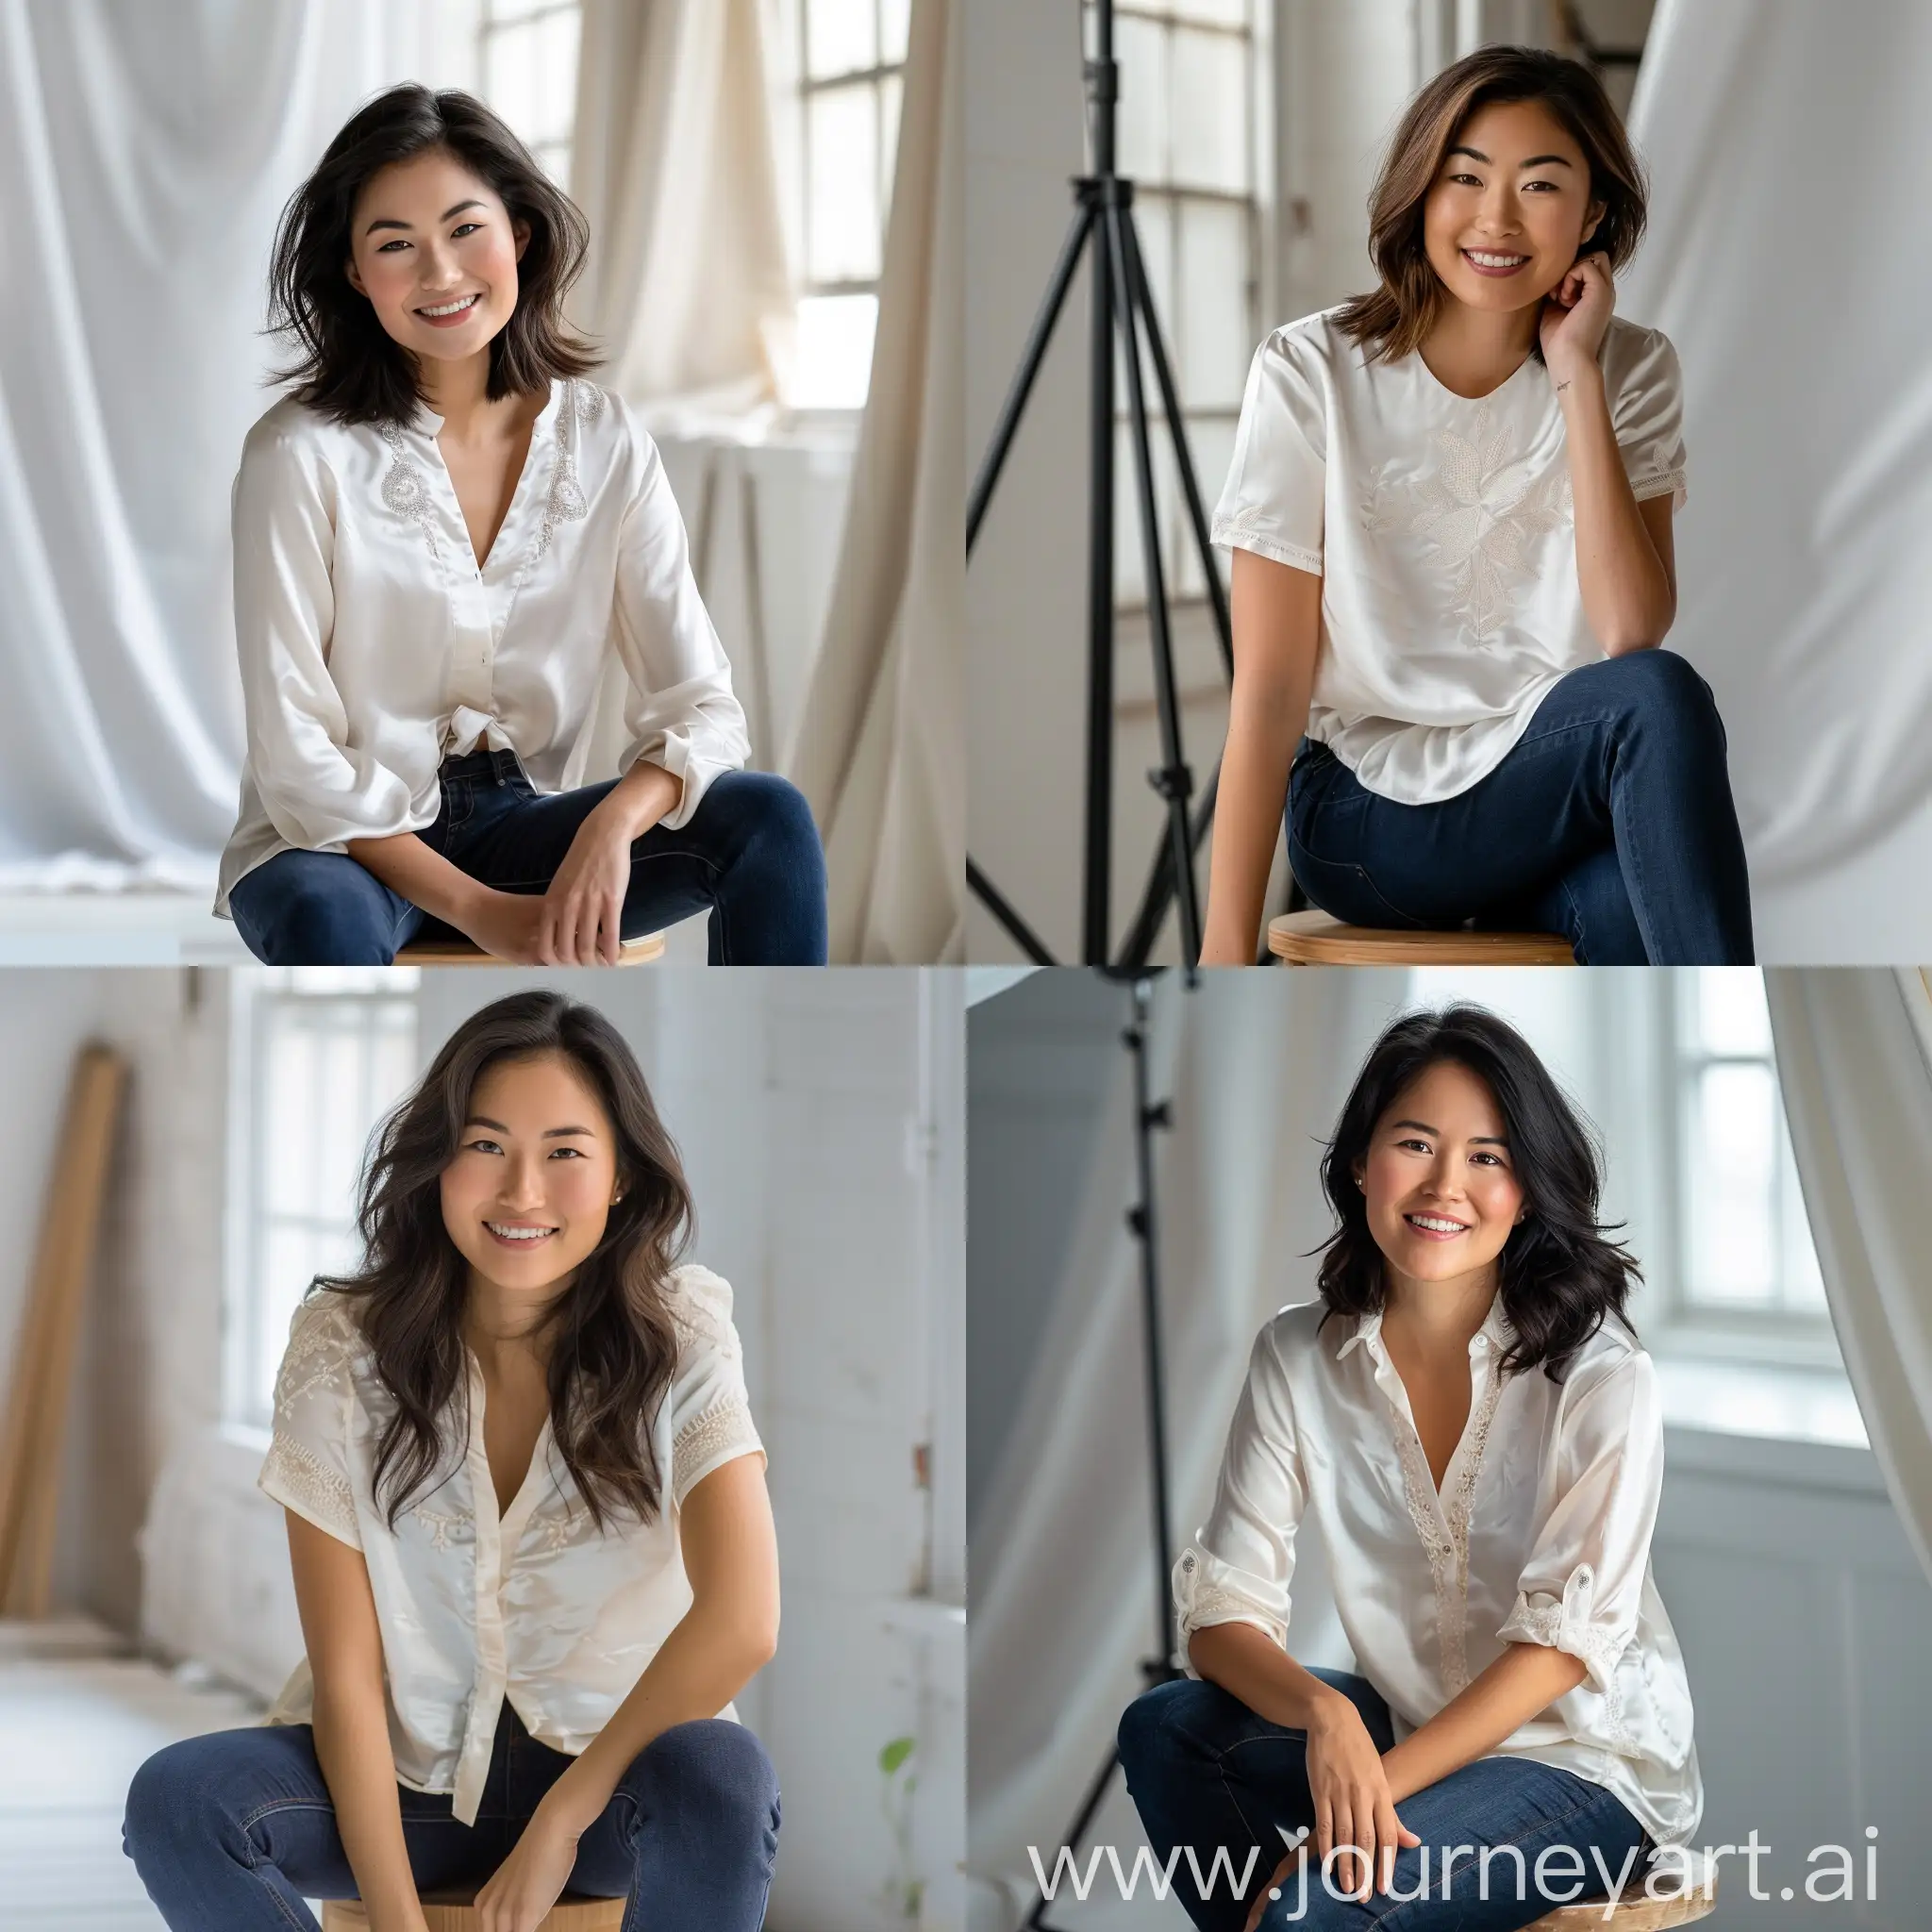 An Asian woman in her mid-20s,
Sitting gracefully on a minimalist wooden stool, hands resting on her knees, head tilted slightly with a warm, friendly smile,
Mid-shot portrait, crisp details, Clean, uncluttered foreground, Subject in sharp focus, medium depth of field,
Wearing a simple, elegant white silk blouse with delicate embroidery and dark blue jeans,
Inside a bright, modern photography studio with white cyclorama walls,
Soft, even lighting illuminating the subject and background,
Studio setting: clean, professional, inviting,
Soft box lighting set up to create a flattering, wraparound light on the subject's face and body,
Midday, neutral white light creating a fresh, contemporary look,
Smooth, flawless skin texture, subtle texture of the silk blouse,
Clean, minimalistic composition with a focus on the subject's natural beauty and friendly expression,
Captured digitally with a high-resolution camera for a polished, modern aesthetic.